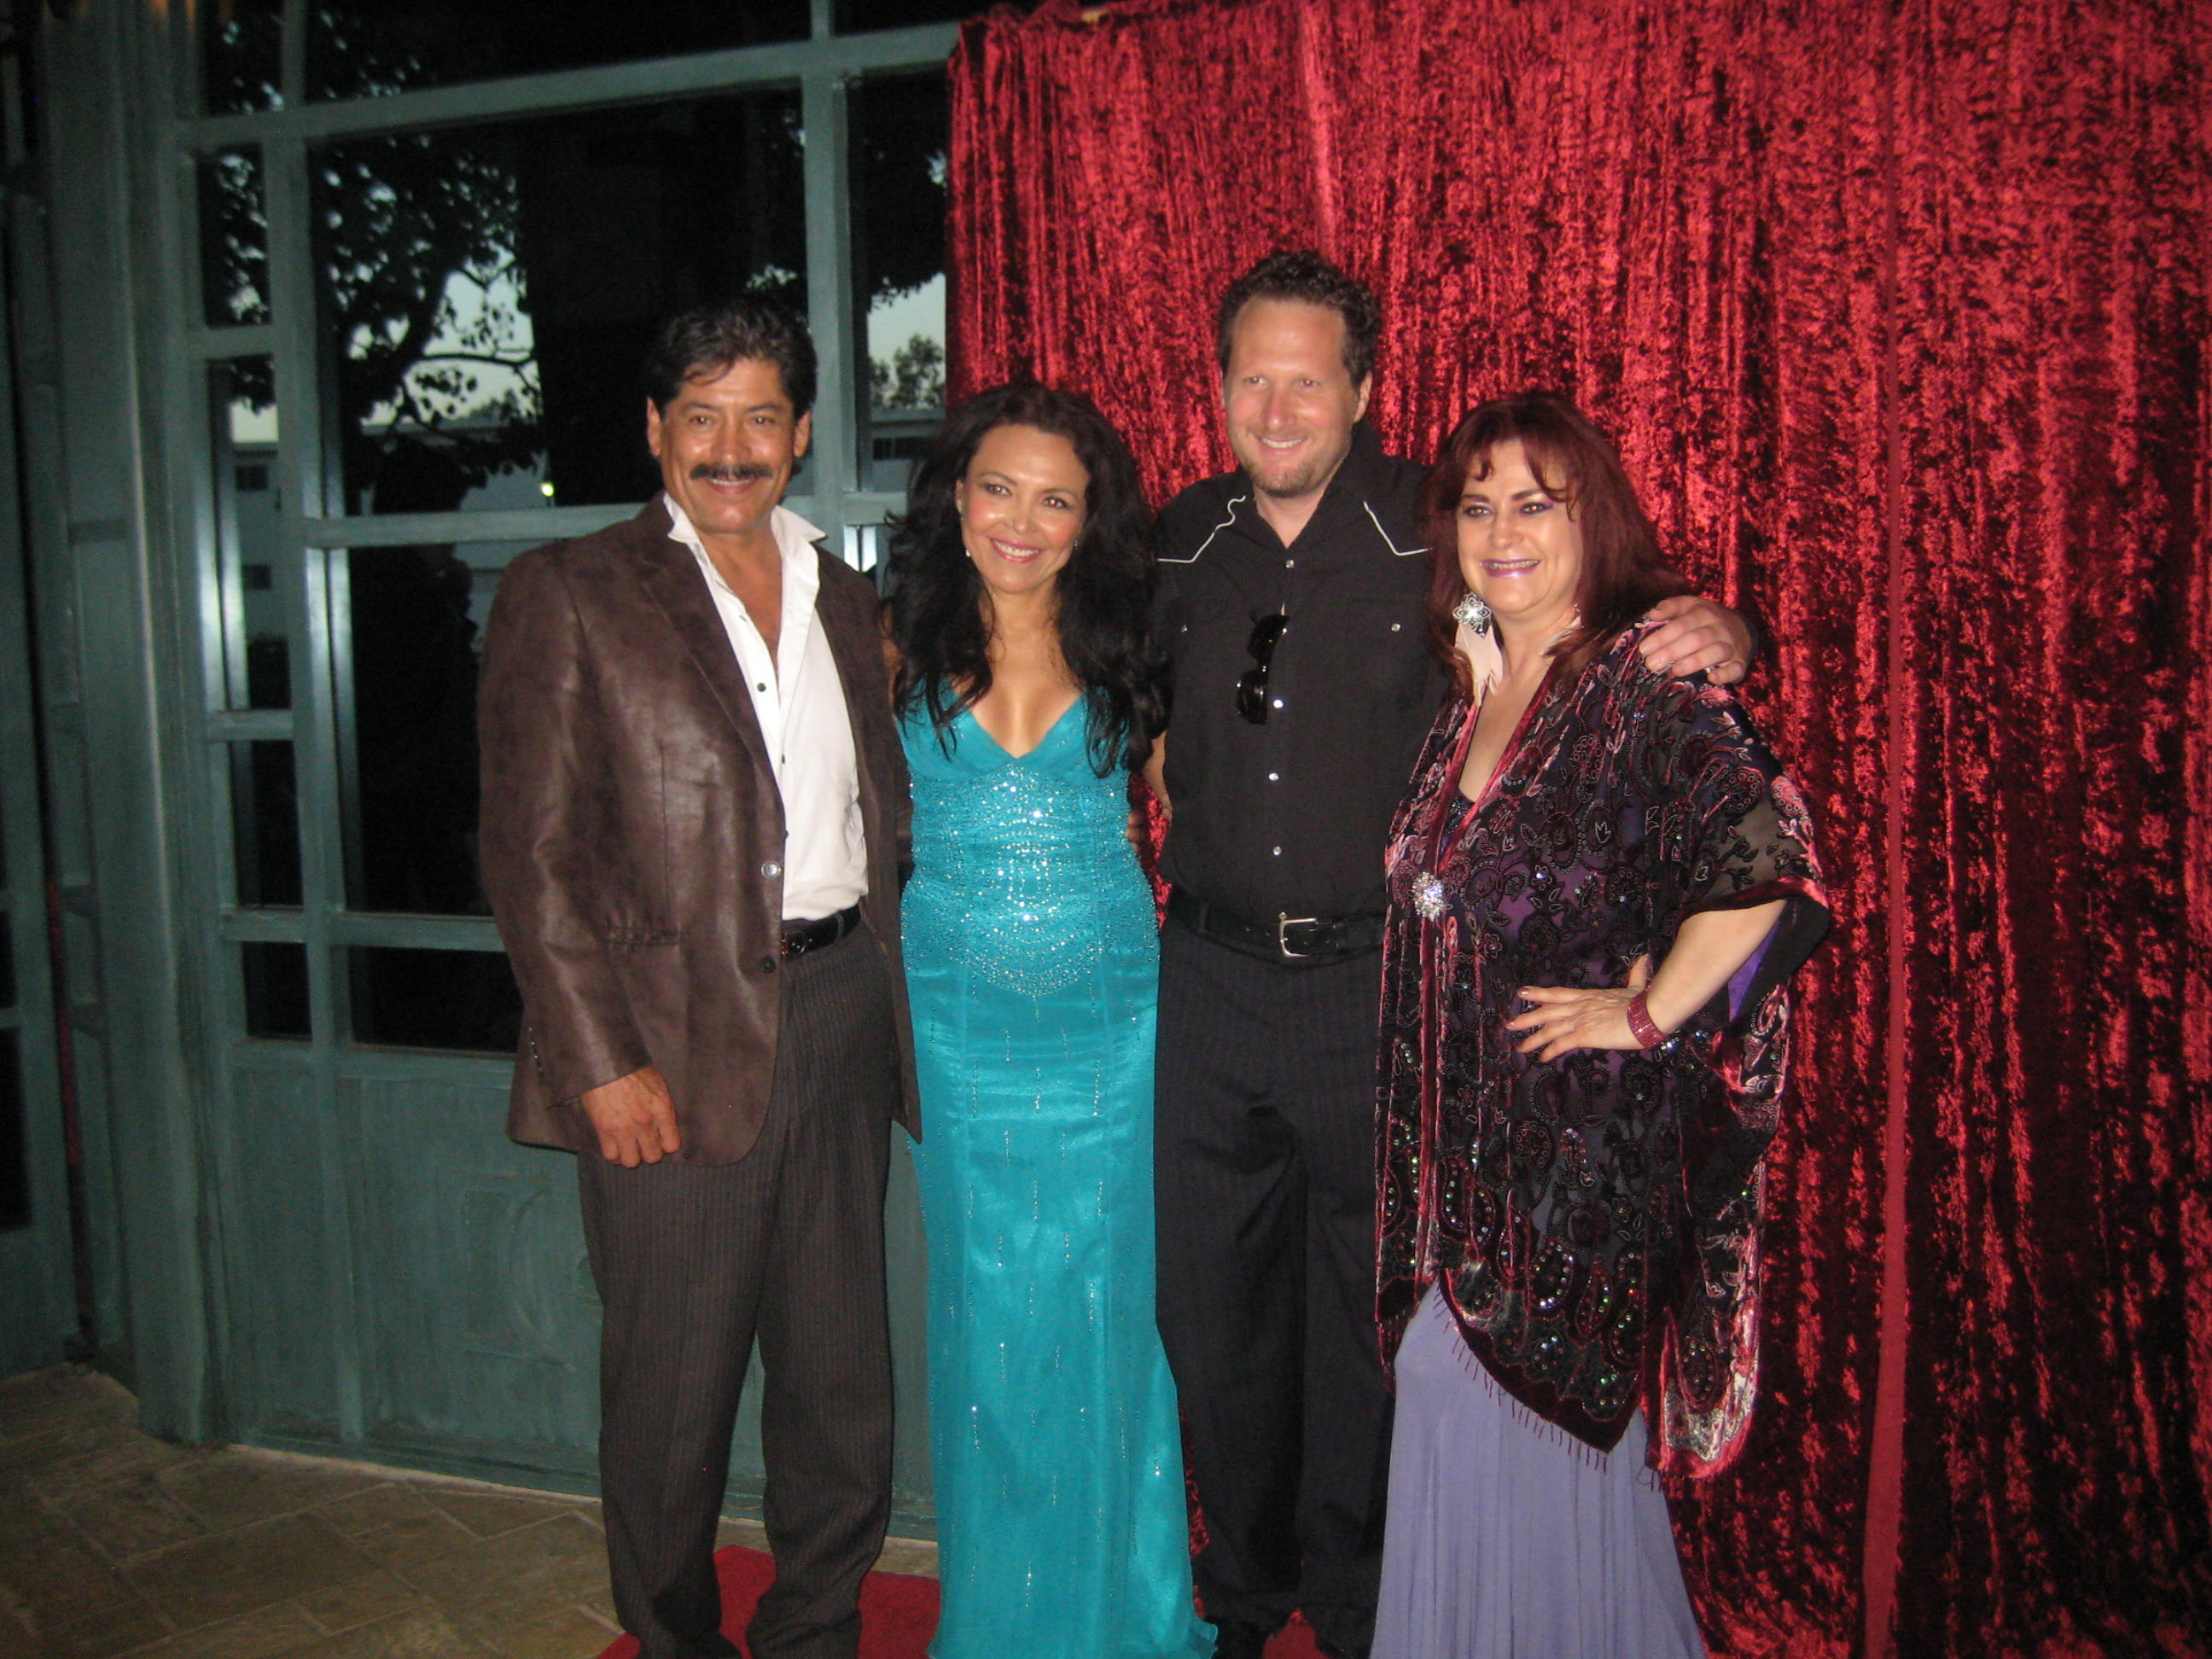 Sandra Santiago with the Mexican movie star Miguel Angel Rodriguez & the actor Andrew Tarr at the screening premier of the film Chihuahua Day, Hollywood California http://www.sandrasantiago.com https://www.facebook.com/SandraSantiago.page?ref=hl